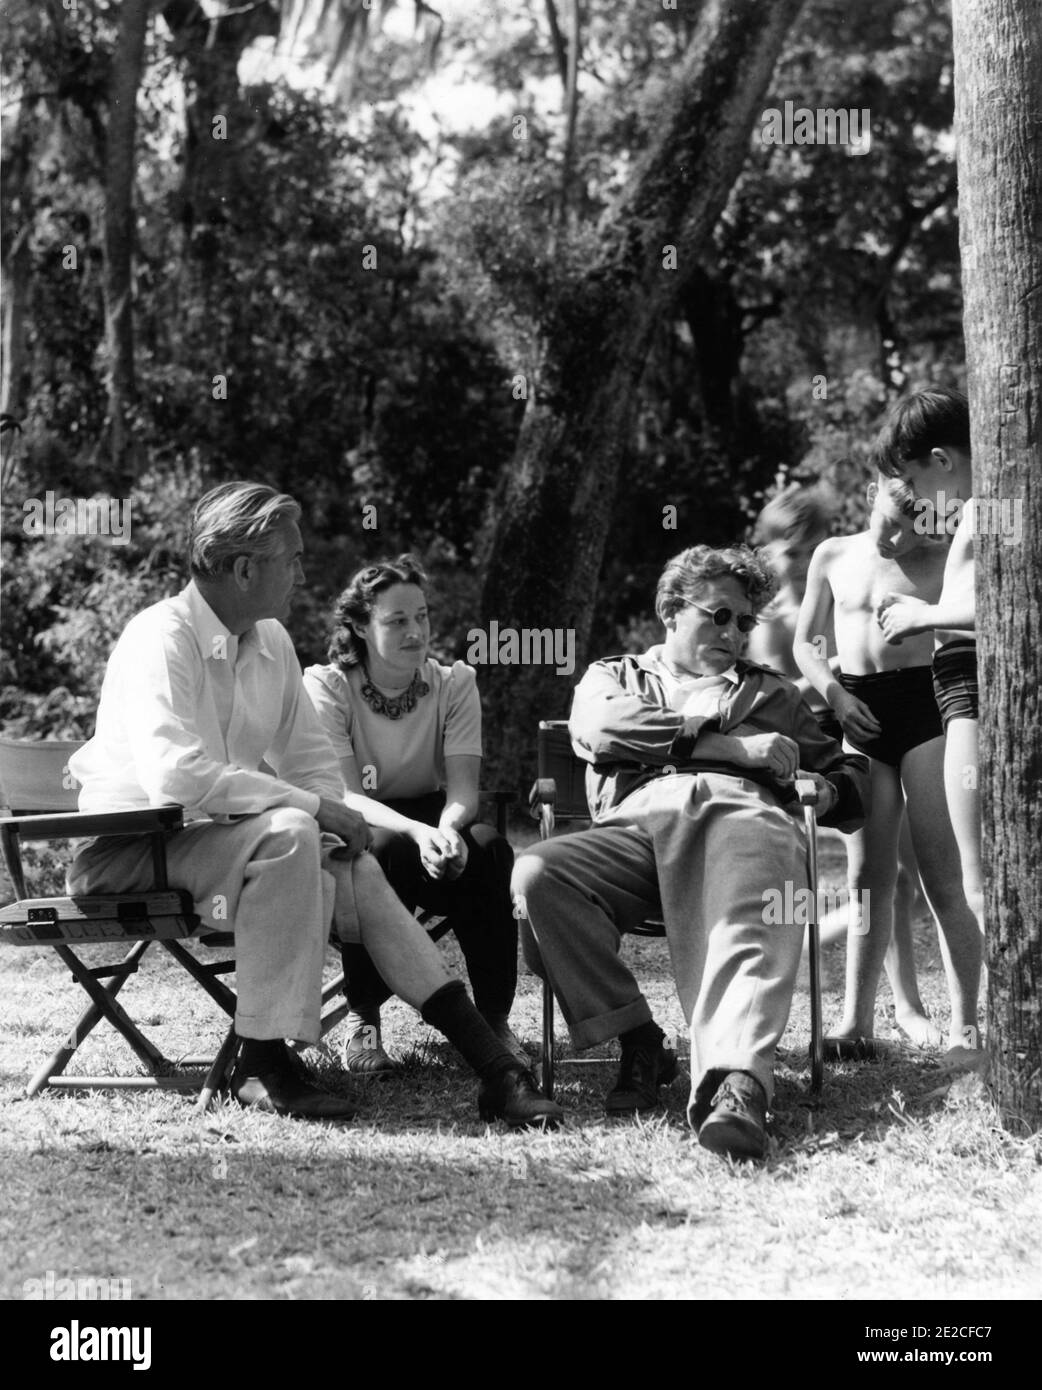 Director VICTOR FLEMING ANNE REVERE and SPENCER TRACY signing autographs for Children on set location candid near Juniper Springs in the Ocala National Forest of Florida during filming of the subsequently aborted film version of THE YEARLING ( from the novel Marjorie Kinnan Rawlings ) in May 1941 publicity for Metro Goldwyn Mayer Stock Photo